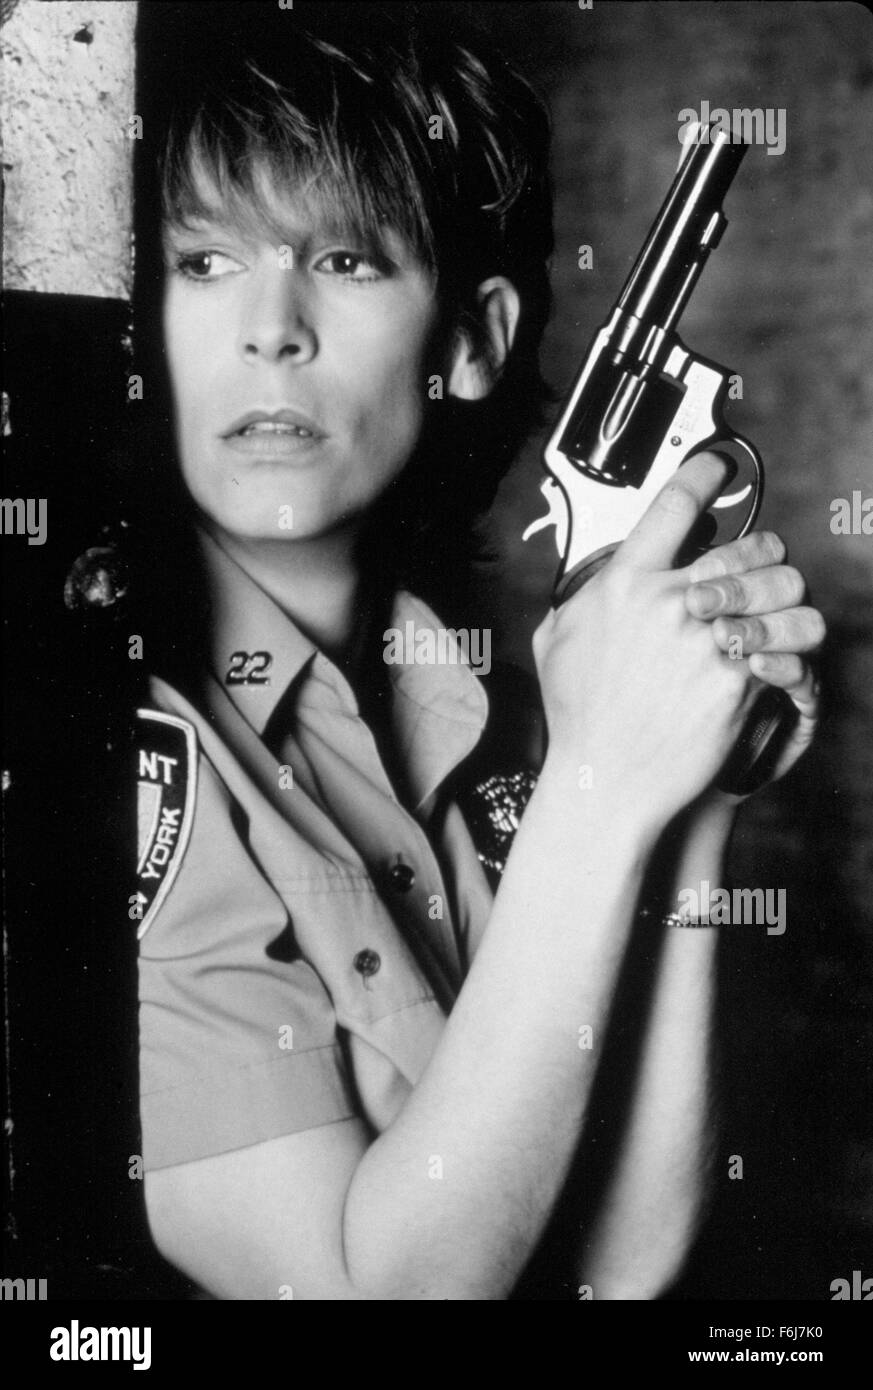 RELEASE DATE: March 16, 1990   MOVIE TITLE: Blue Steel   STUDIO: Lightning Pictures   DIRECTOR: Kathryn Bigelow   PLOT: A female rookie in the police force engages in a cat and mouse game with a pistol wielding psychopath who becomes obsessed with her.   PICTURED: JAMIE LEE CURTIS as Megan Turner.   (Credit Image: c Lightning Pictures/Entertainment Pictures) Stock Photo